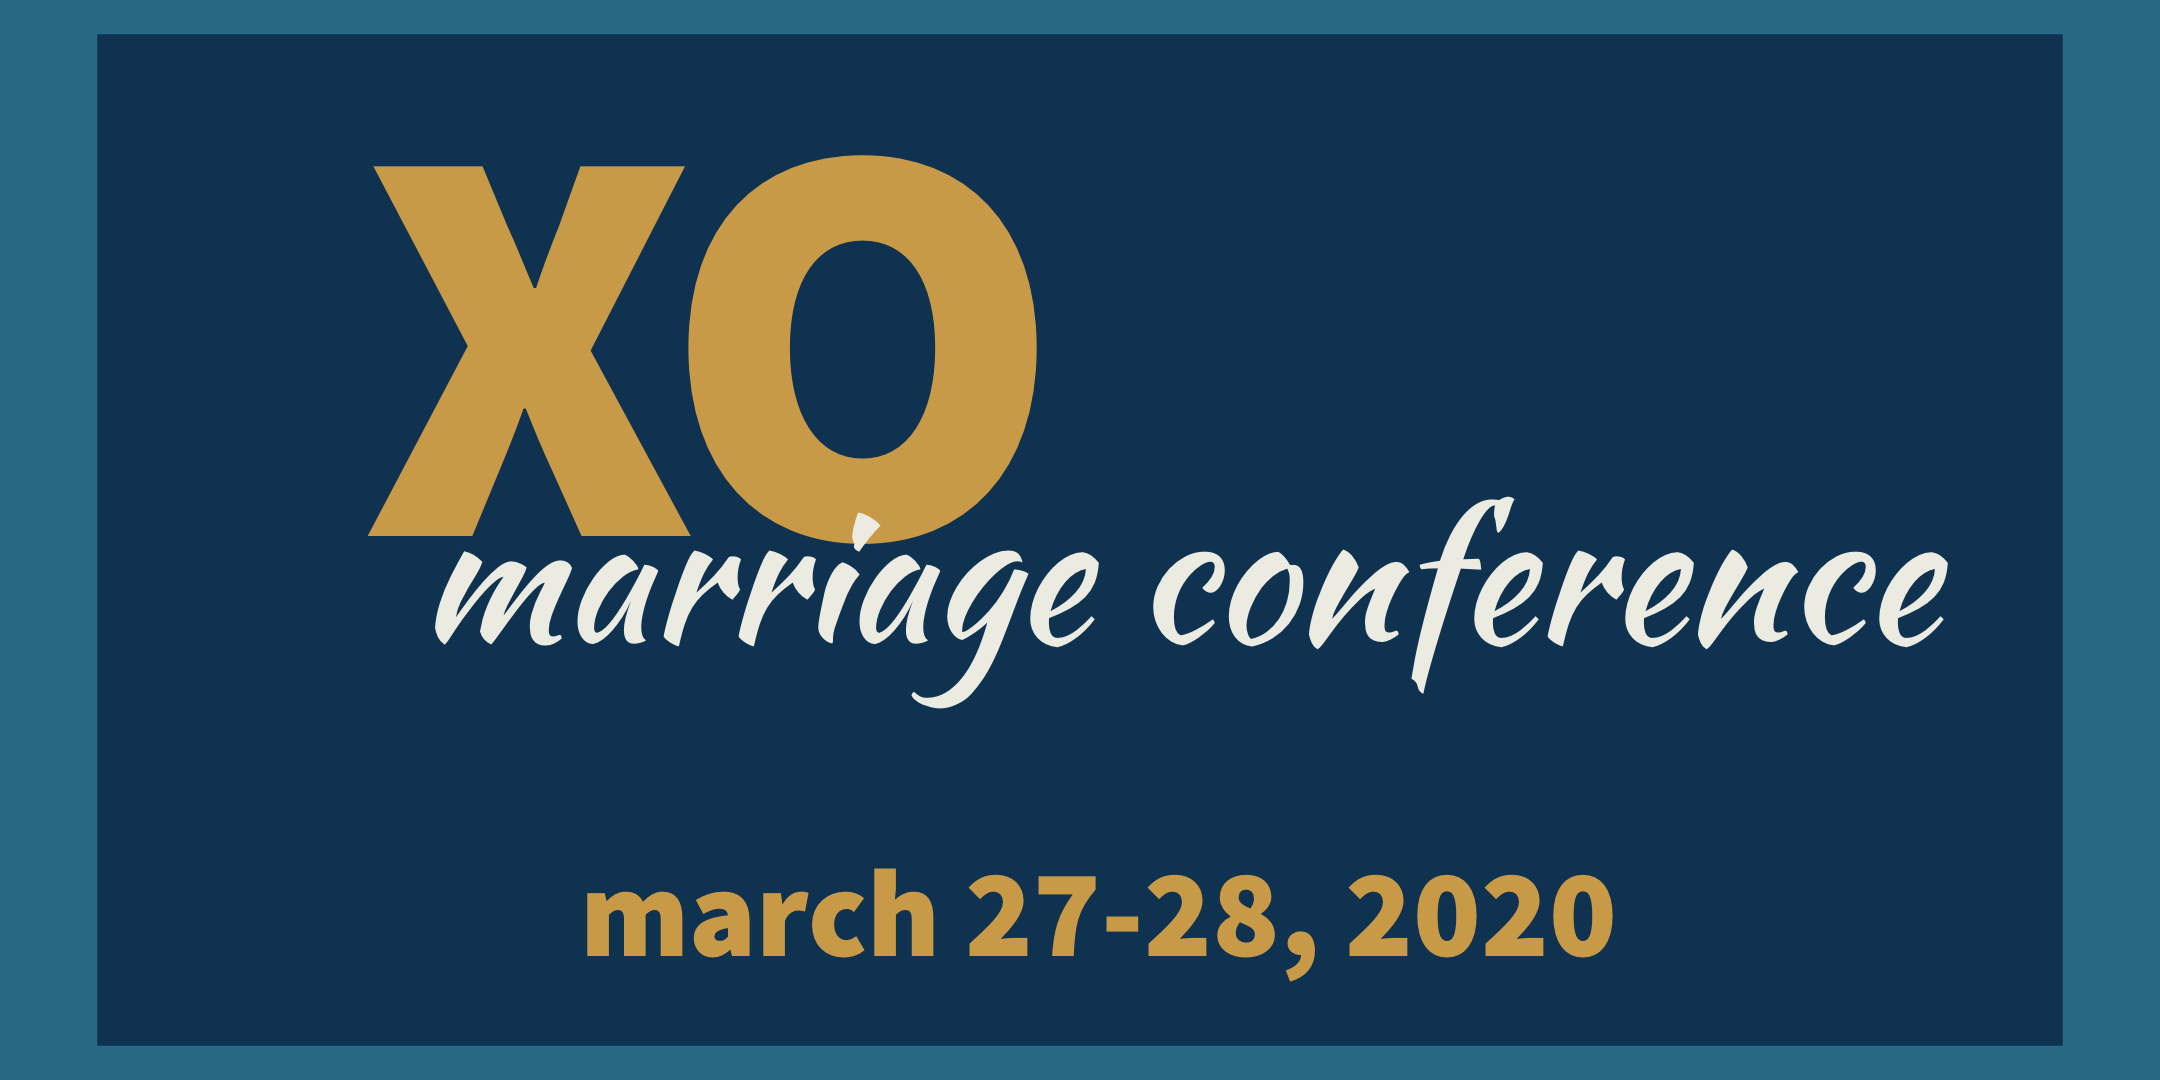 Xo Marriage Conference Strengthen Your Marriage Broad River Church